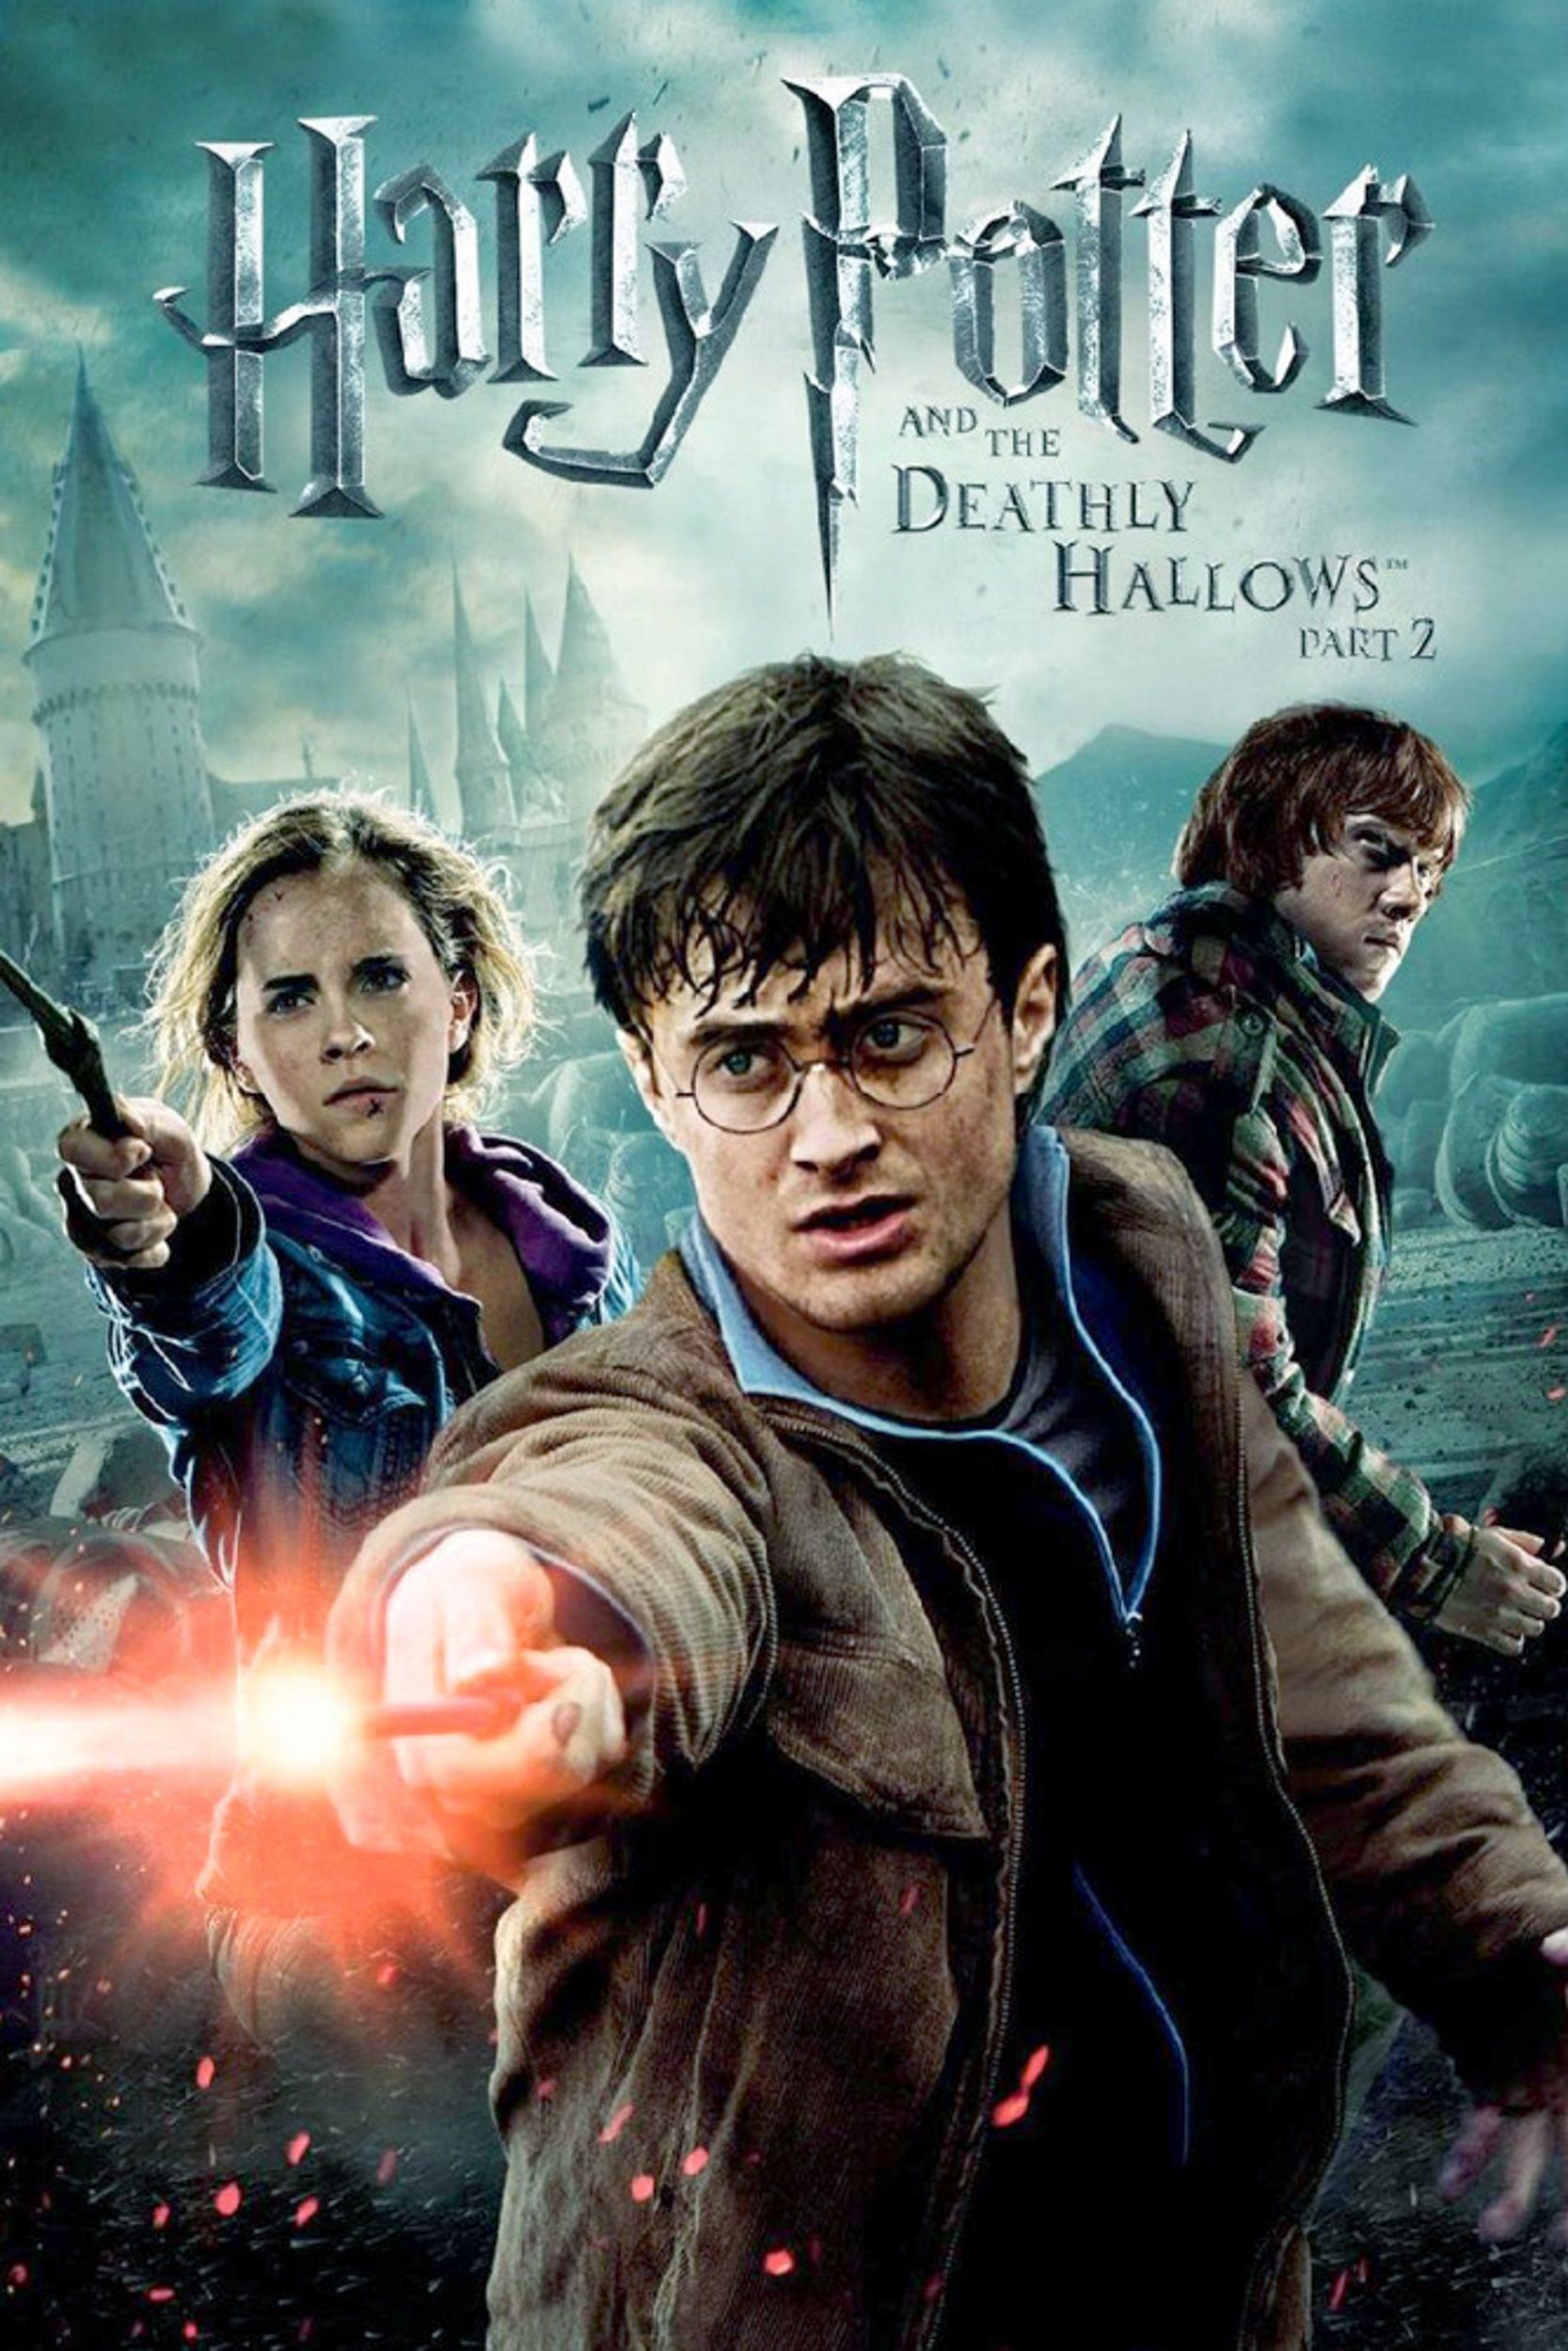 where can i stream harry potter movies